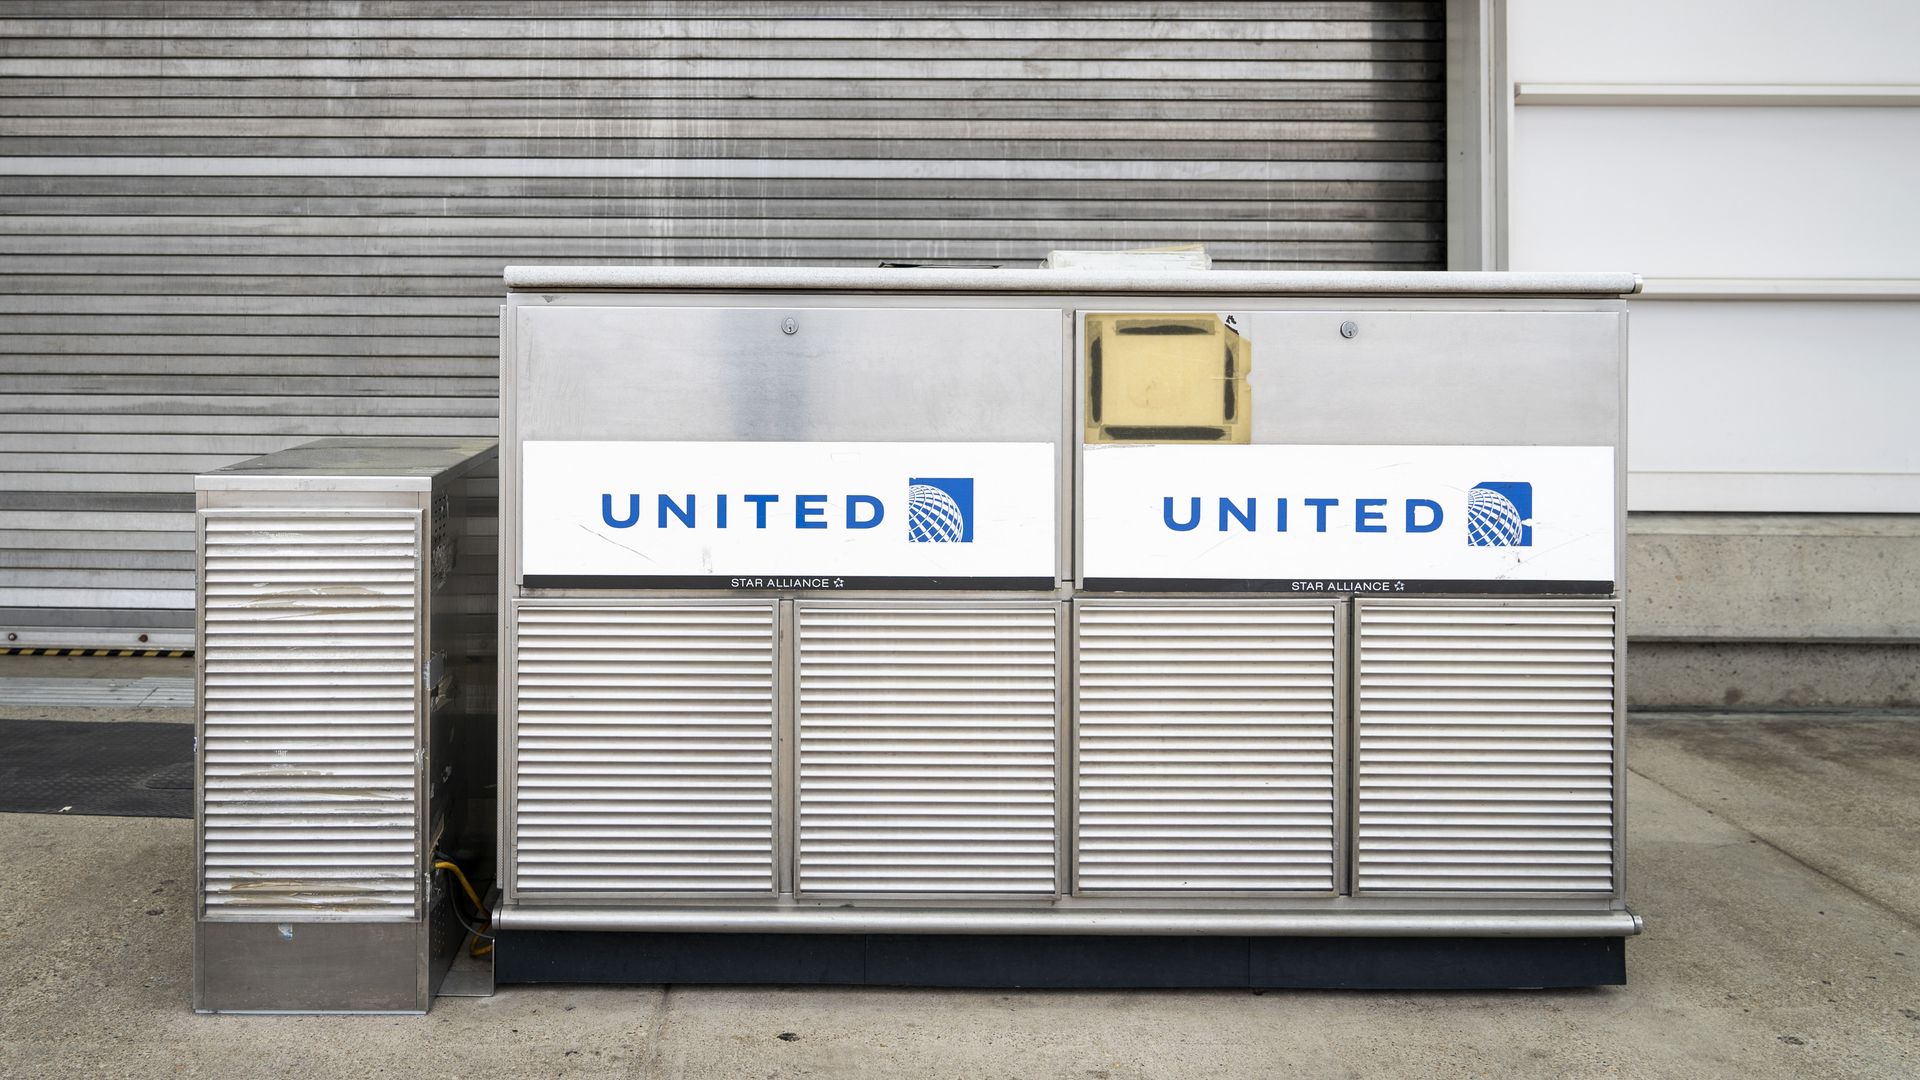 An empty United Airlines kiosk